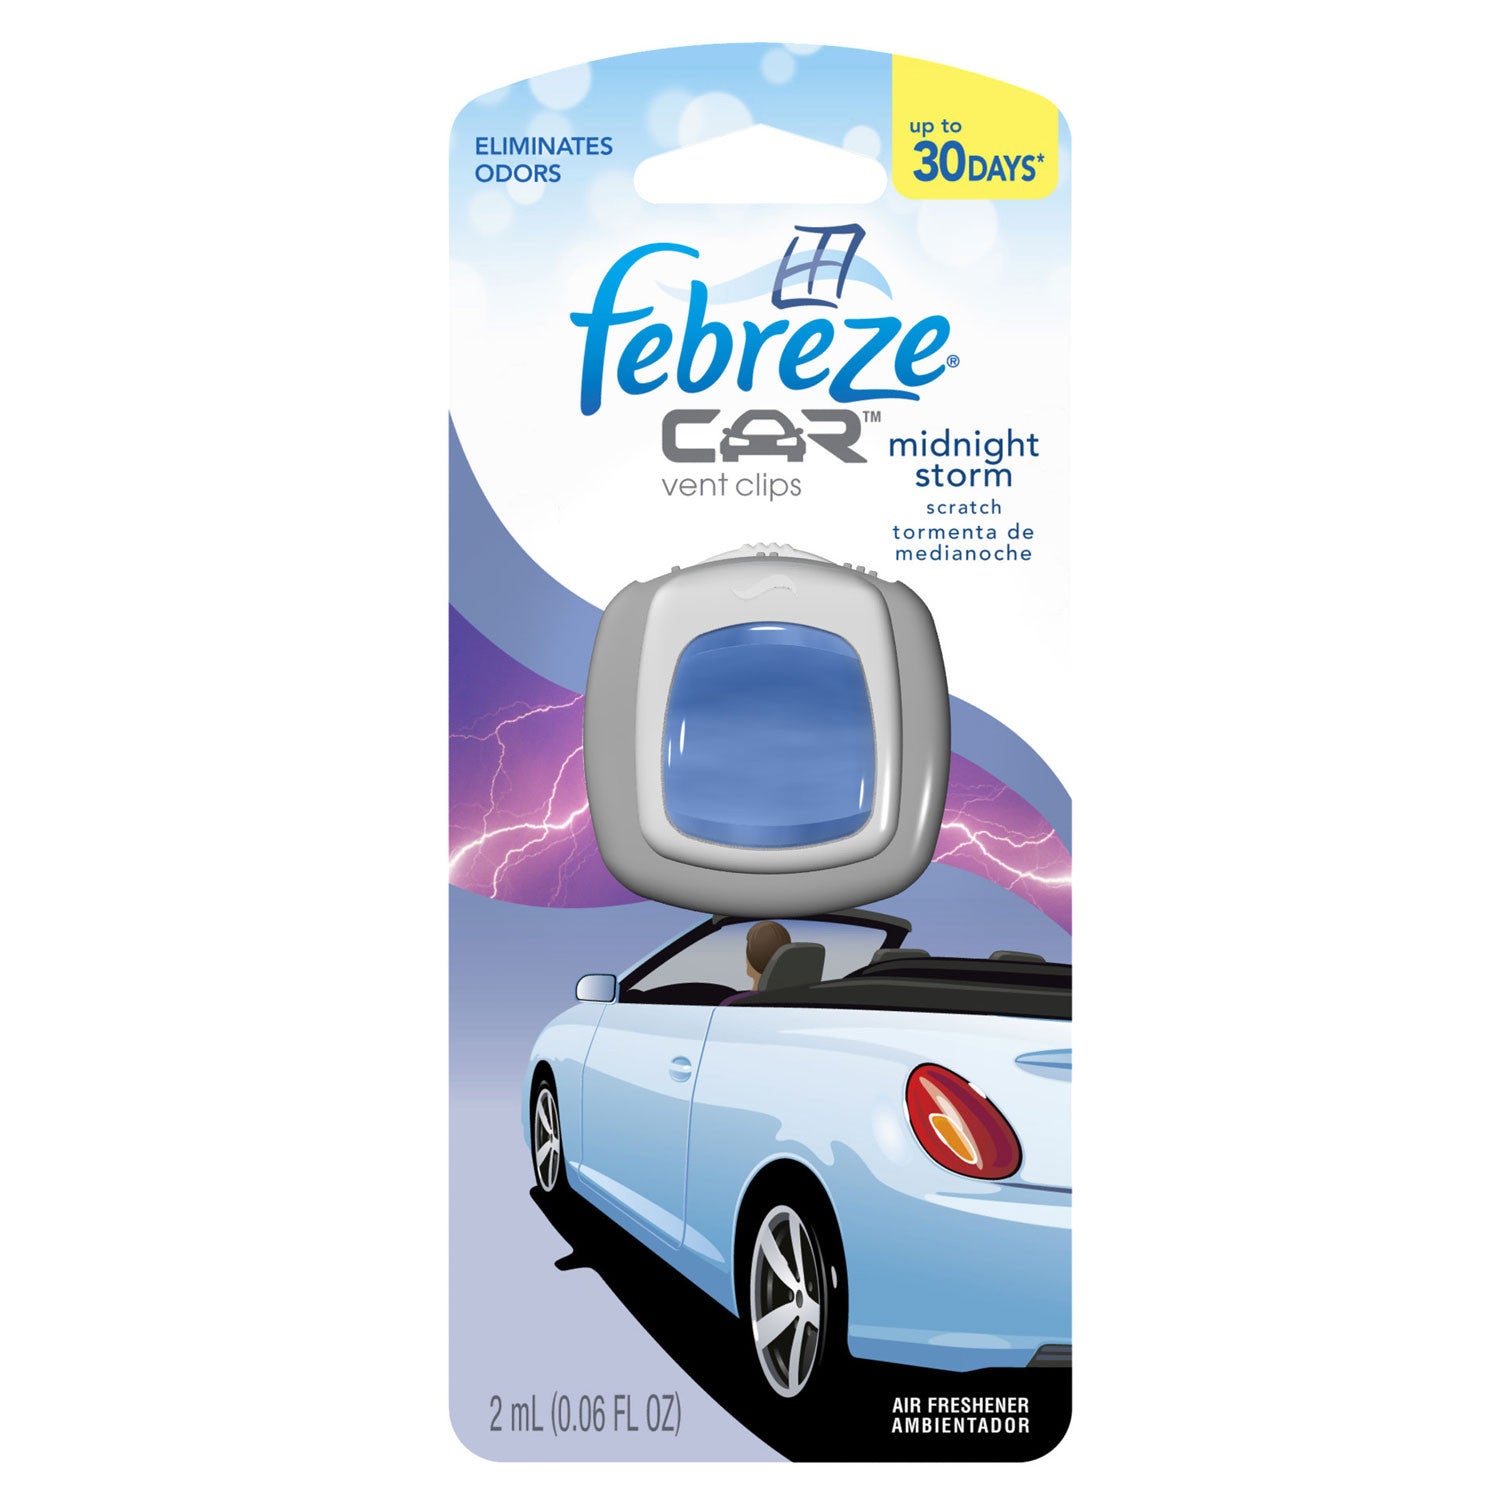 Febreze Car Vent Clip Review: A New Type of Air Freshener - The News Wheel